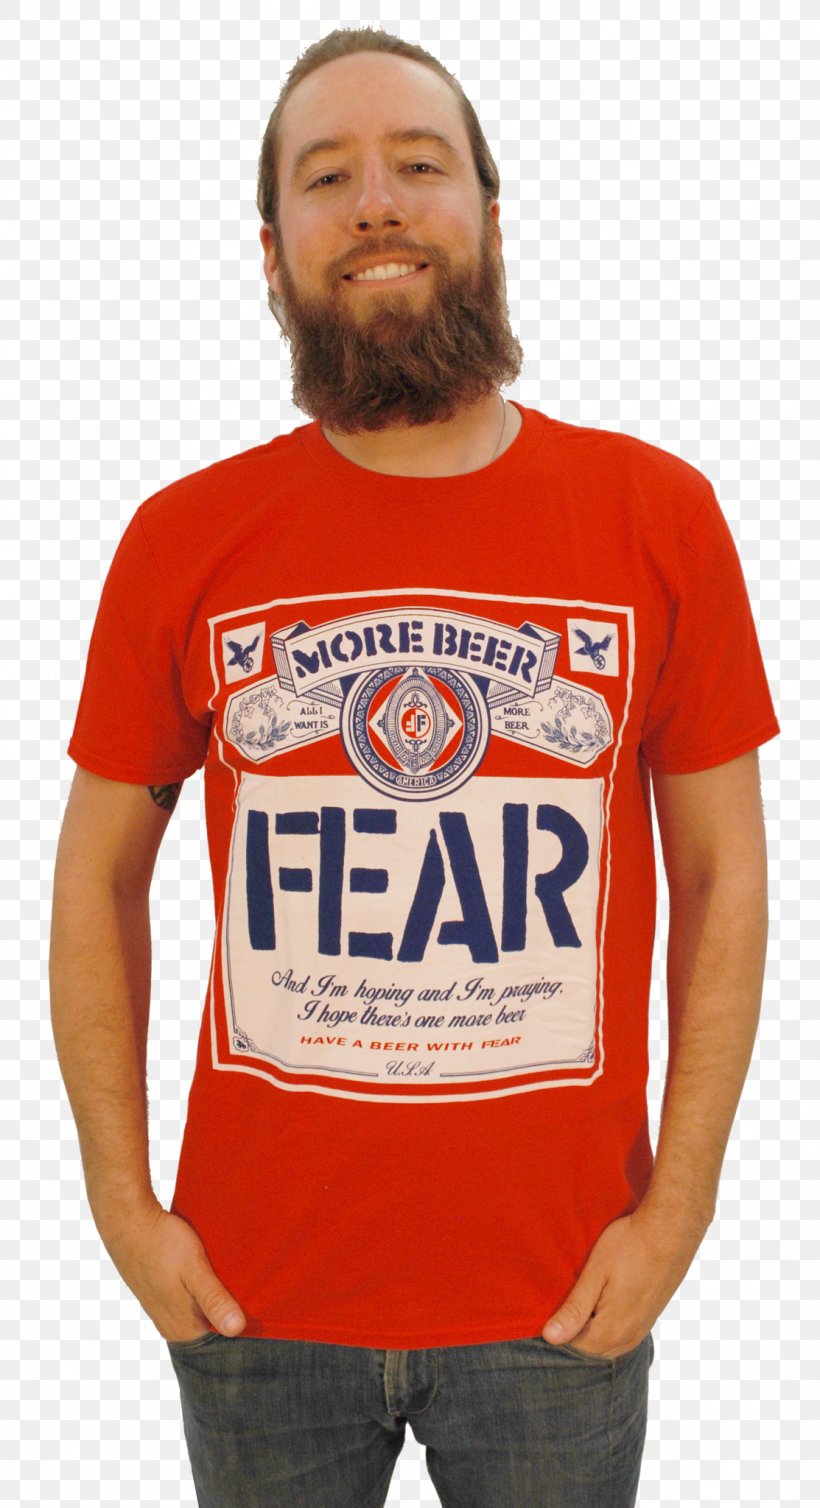 T Shirt Beer Carling Black Label Fear Png 1113x2048px Tshirt Beard Beer Bottle Carling Black Label